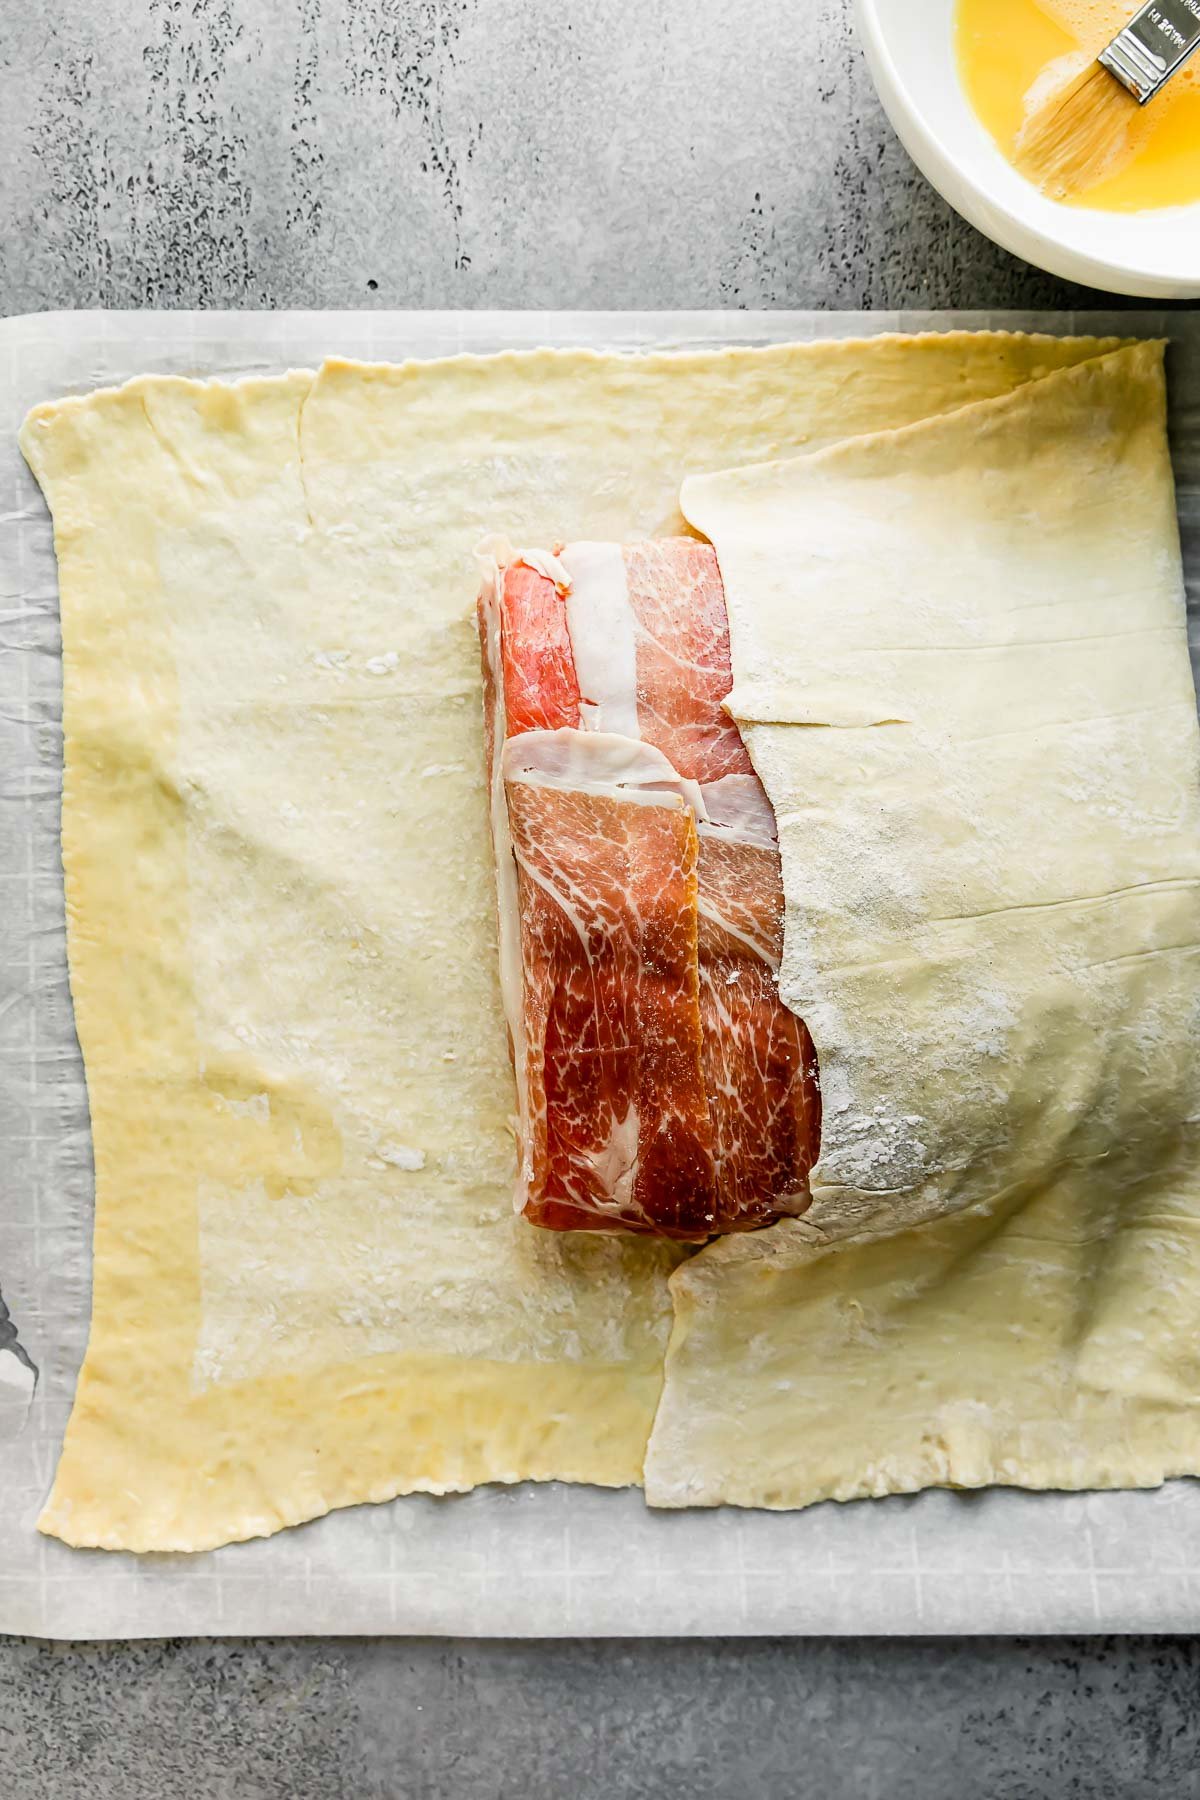 A large rectangular piece of puff pastry is partially folded over and atop of prosciutto-wrapped salmon. The puff pastry & salmon sit atop a large piece of parchment paper that rests atop a light gray textured surface. This is the begining of salmon wellington forming. A small white bowl filled with egg wash with pastry brush resting alongside rests near the salmon en croute.